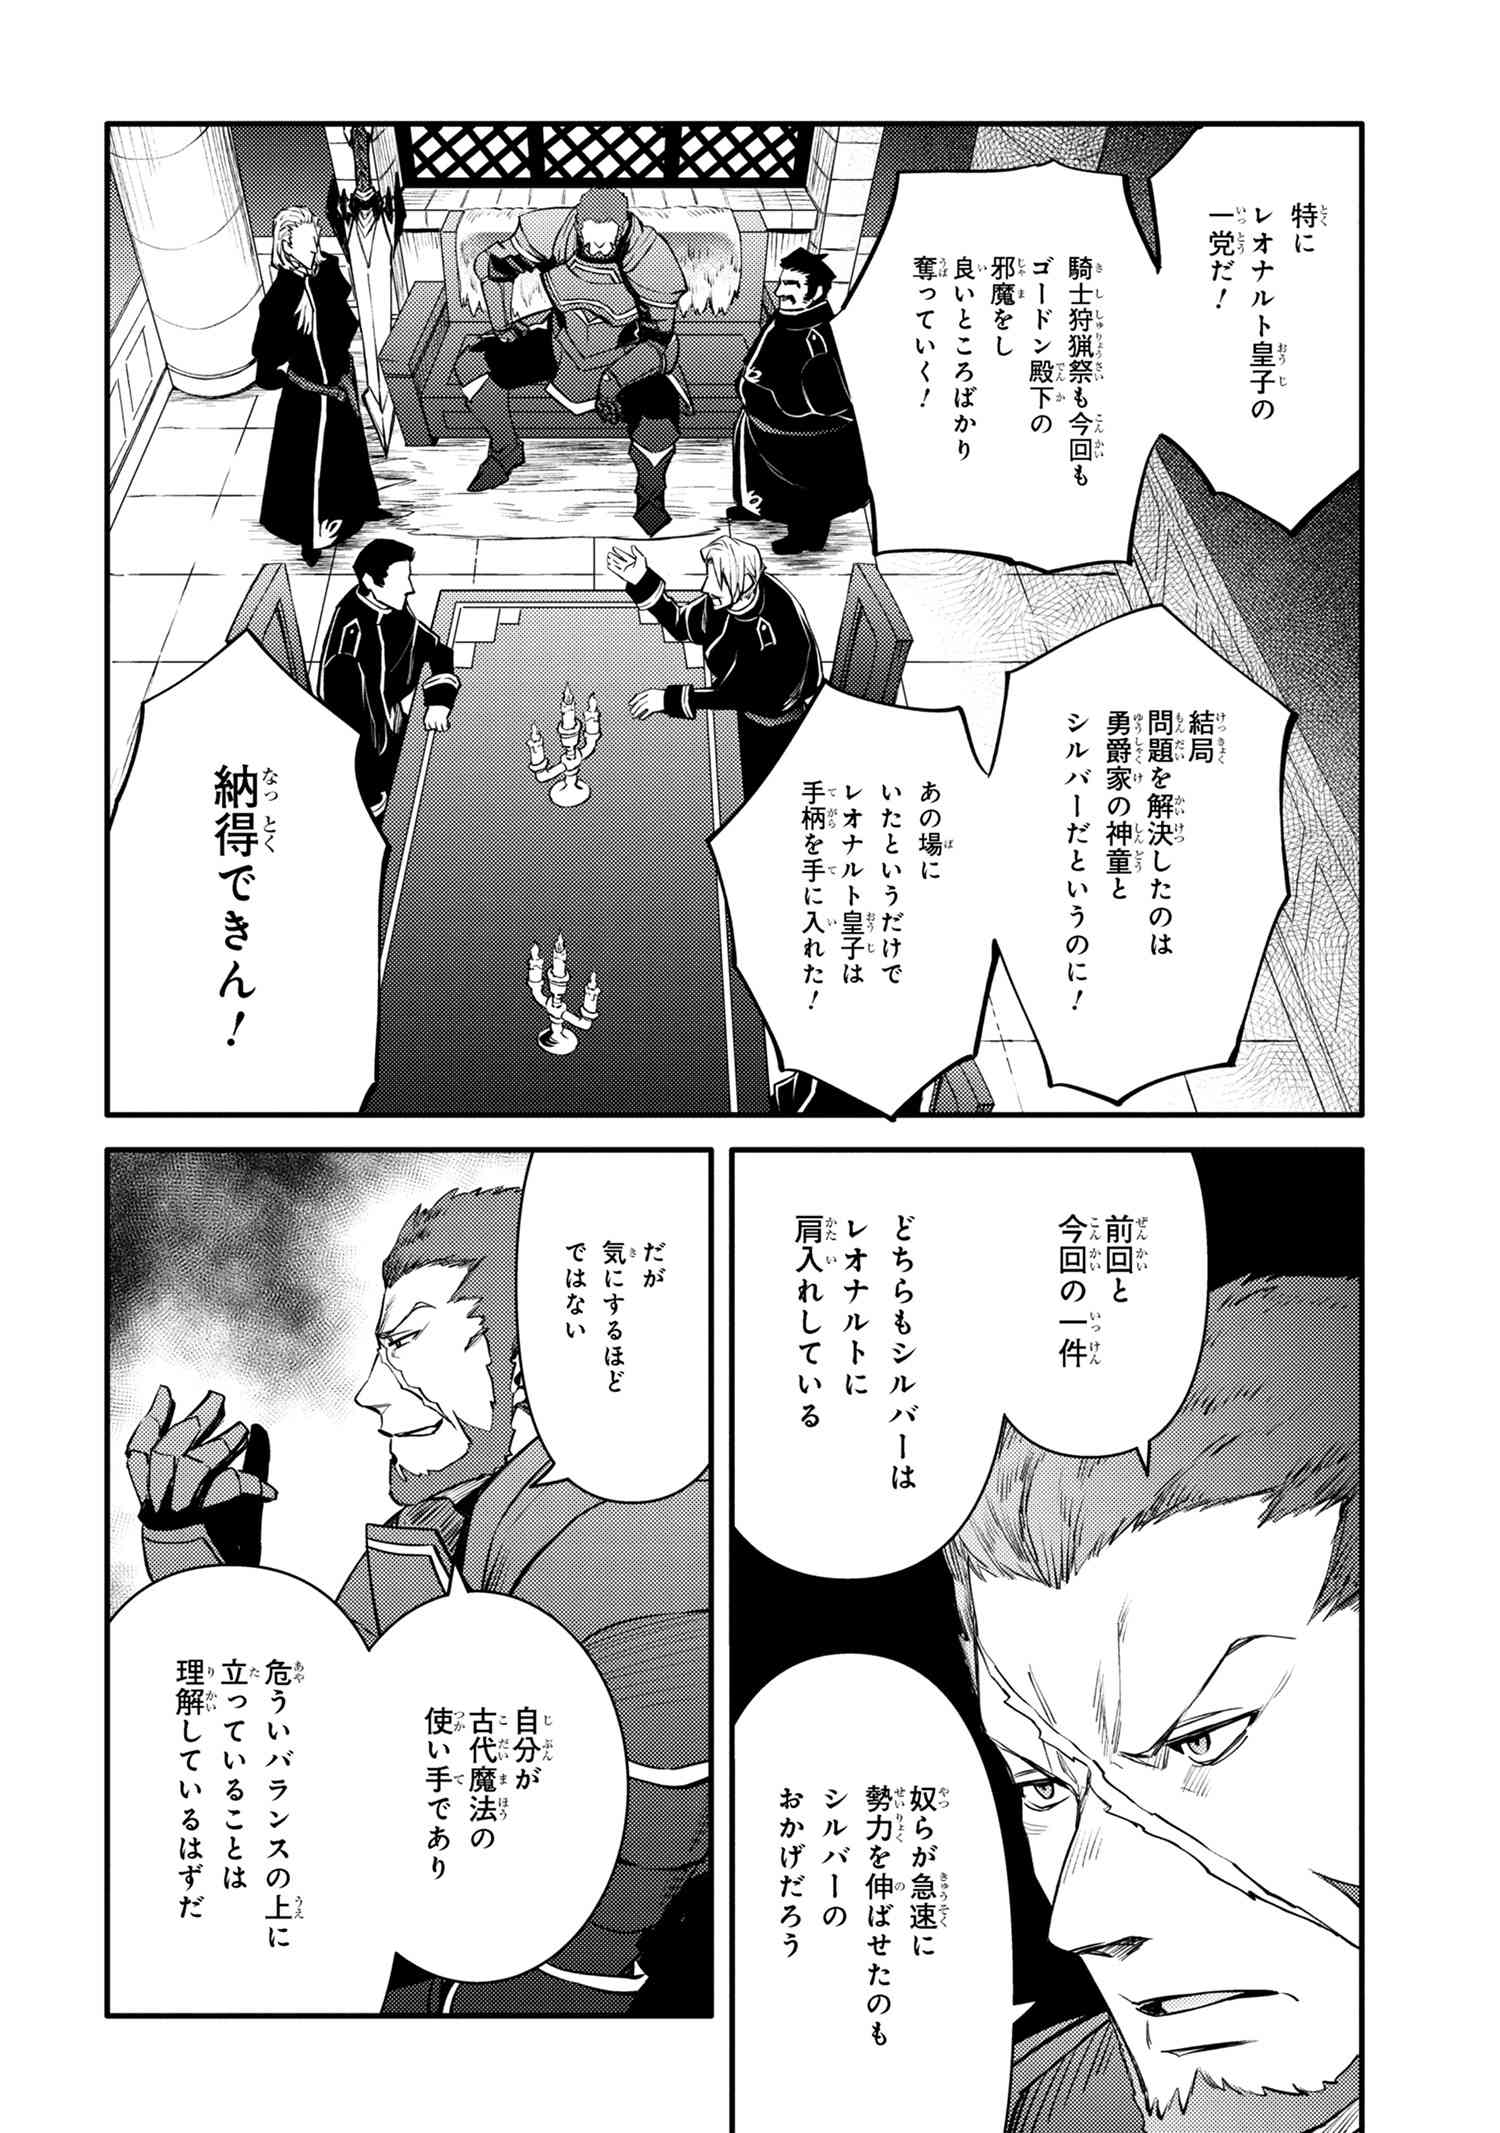 The Strongest Dull Prince’s Secret Battle for the Throne - Chapter 38.2 - Page 3